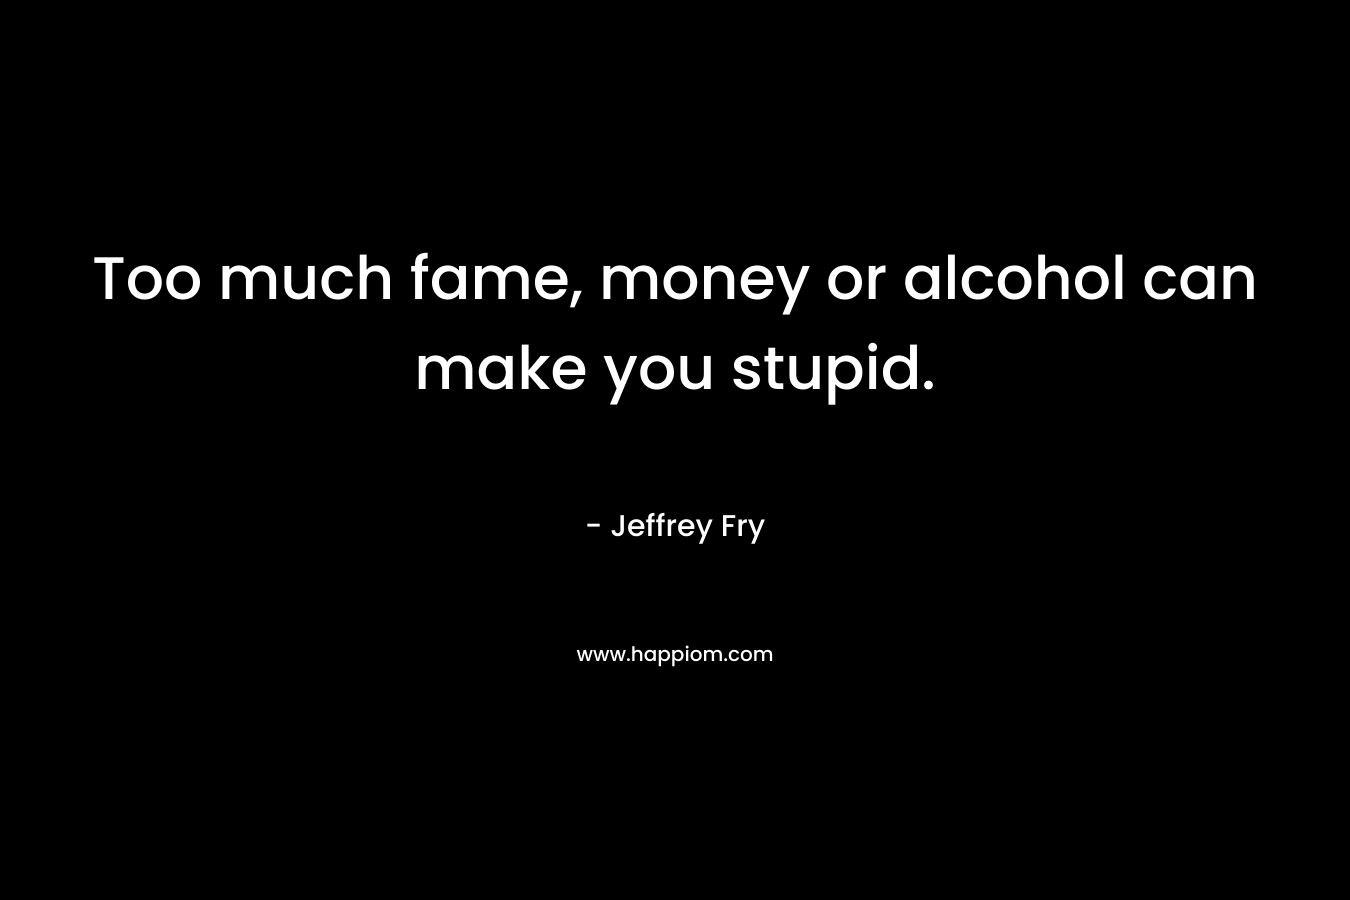 Too much fame, money or alcohol can make you stupid.